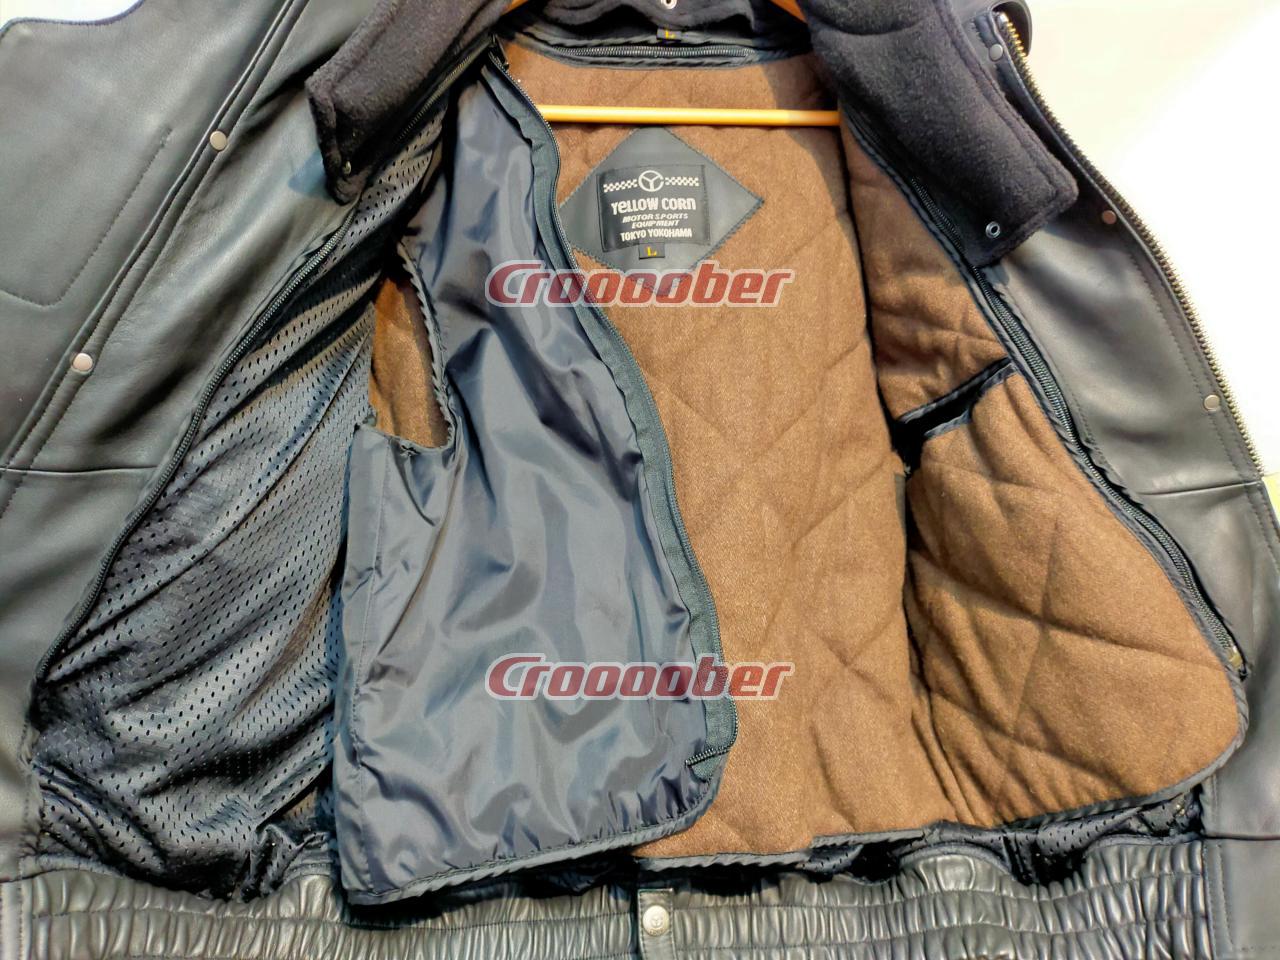 YELLOW- Yellow Corn HIGHWAY-MAGICIAN・THE3RD Leather Leather Reduction Jacket Jackets From Special | | Significant Price [L] Croooober Price! 2022-8/6